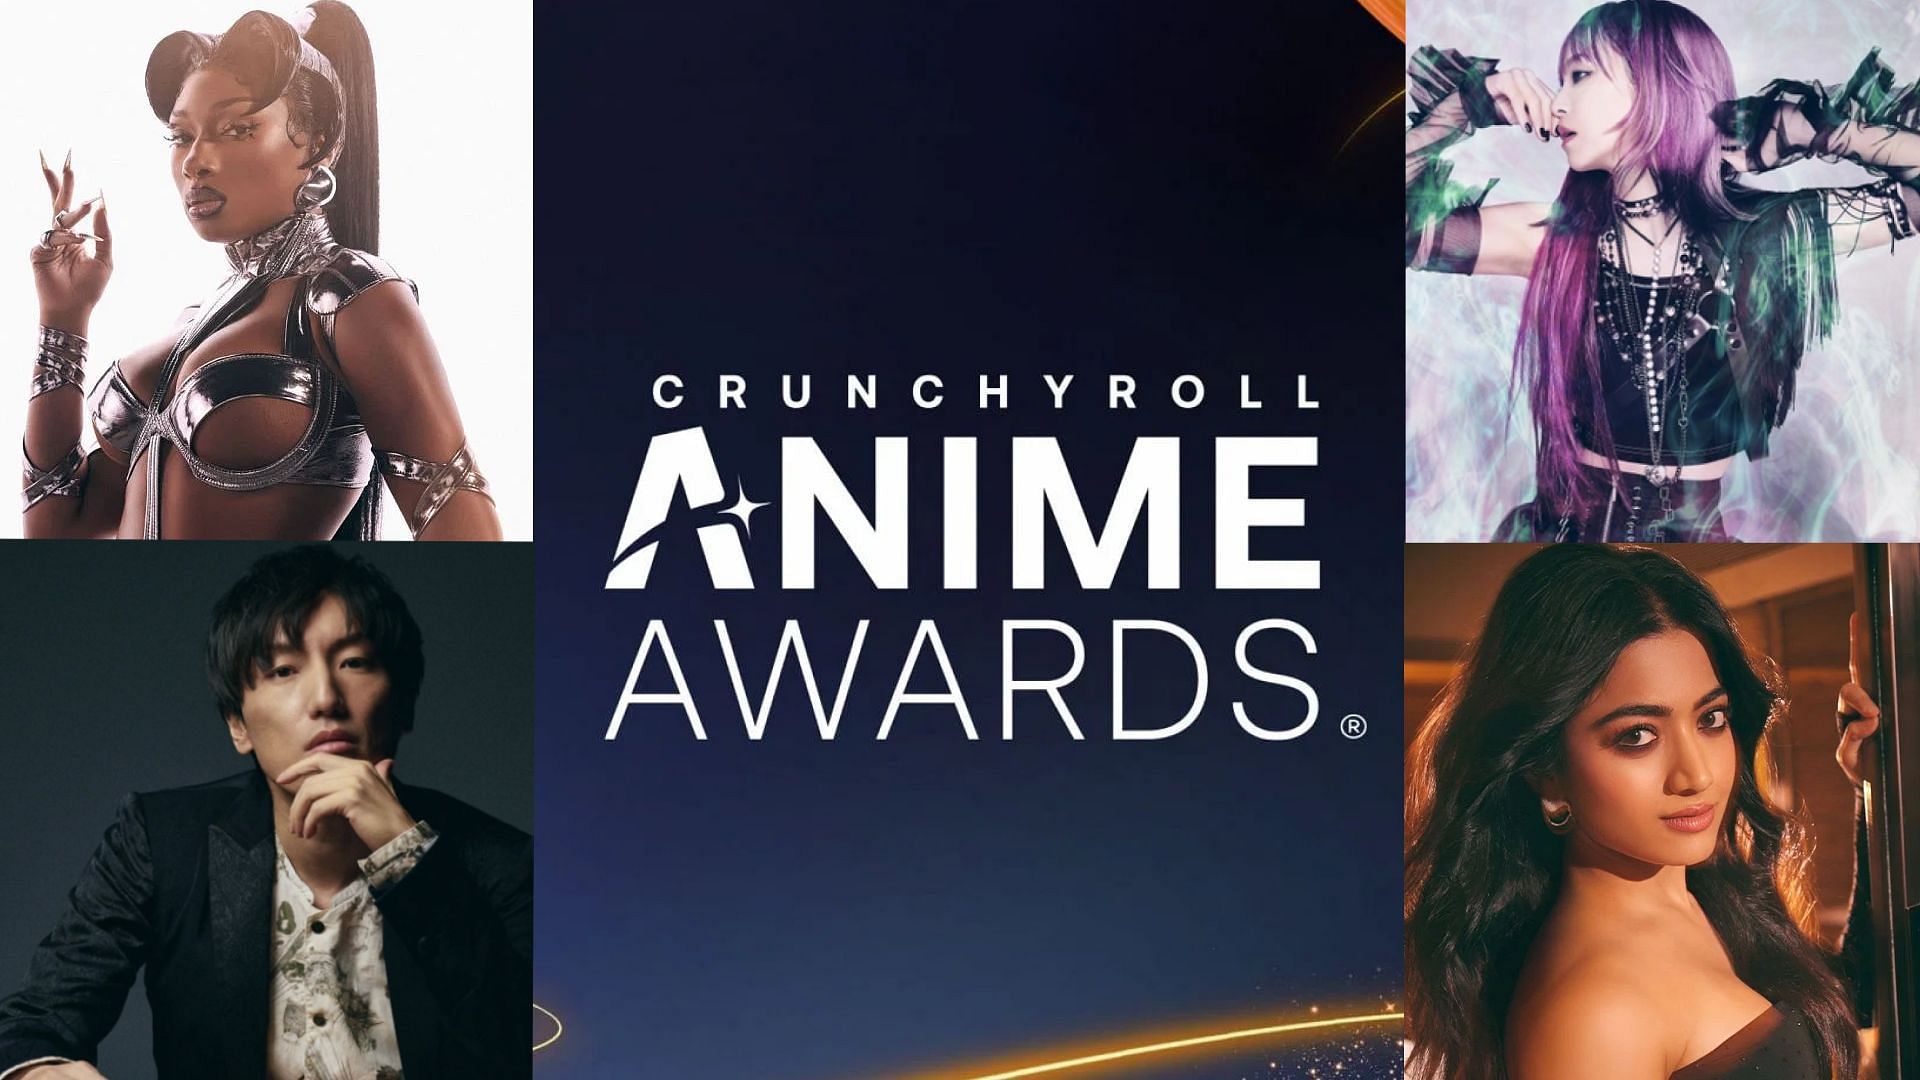 Here Are All The Winners Of The 2019 Crunchyroll Anime Awards